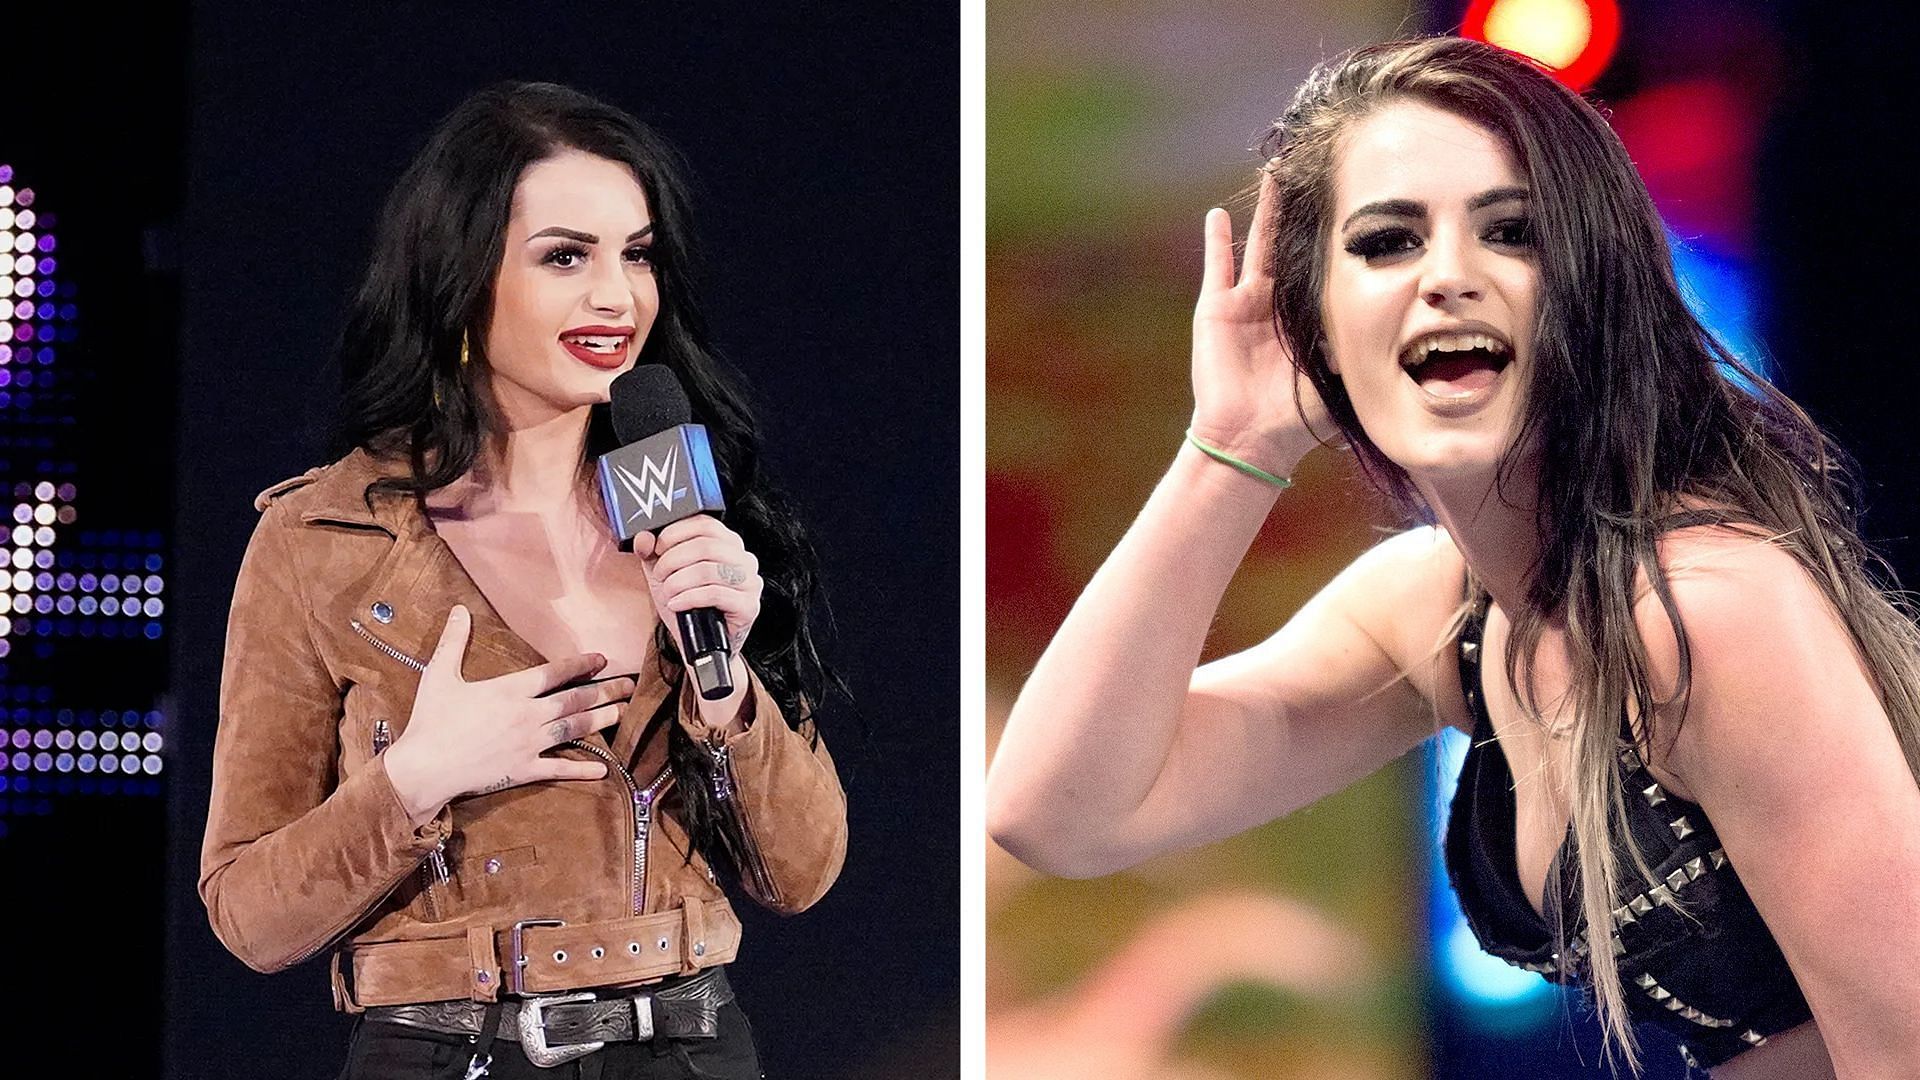 Paige revealed that her WWE contract is expiring